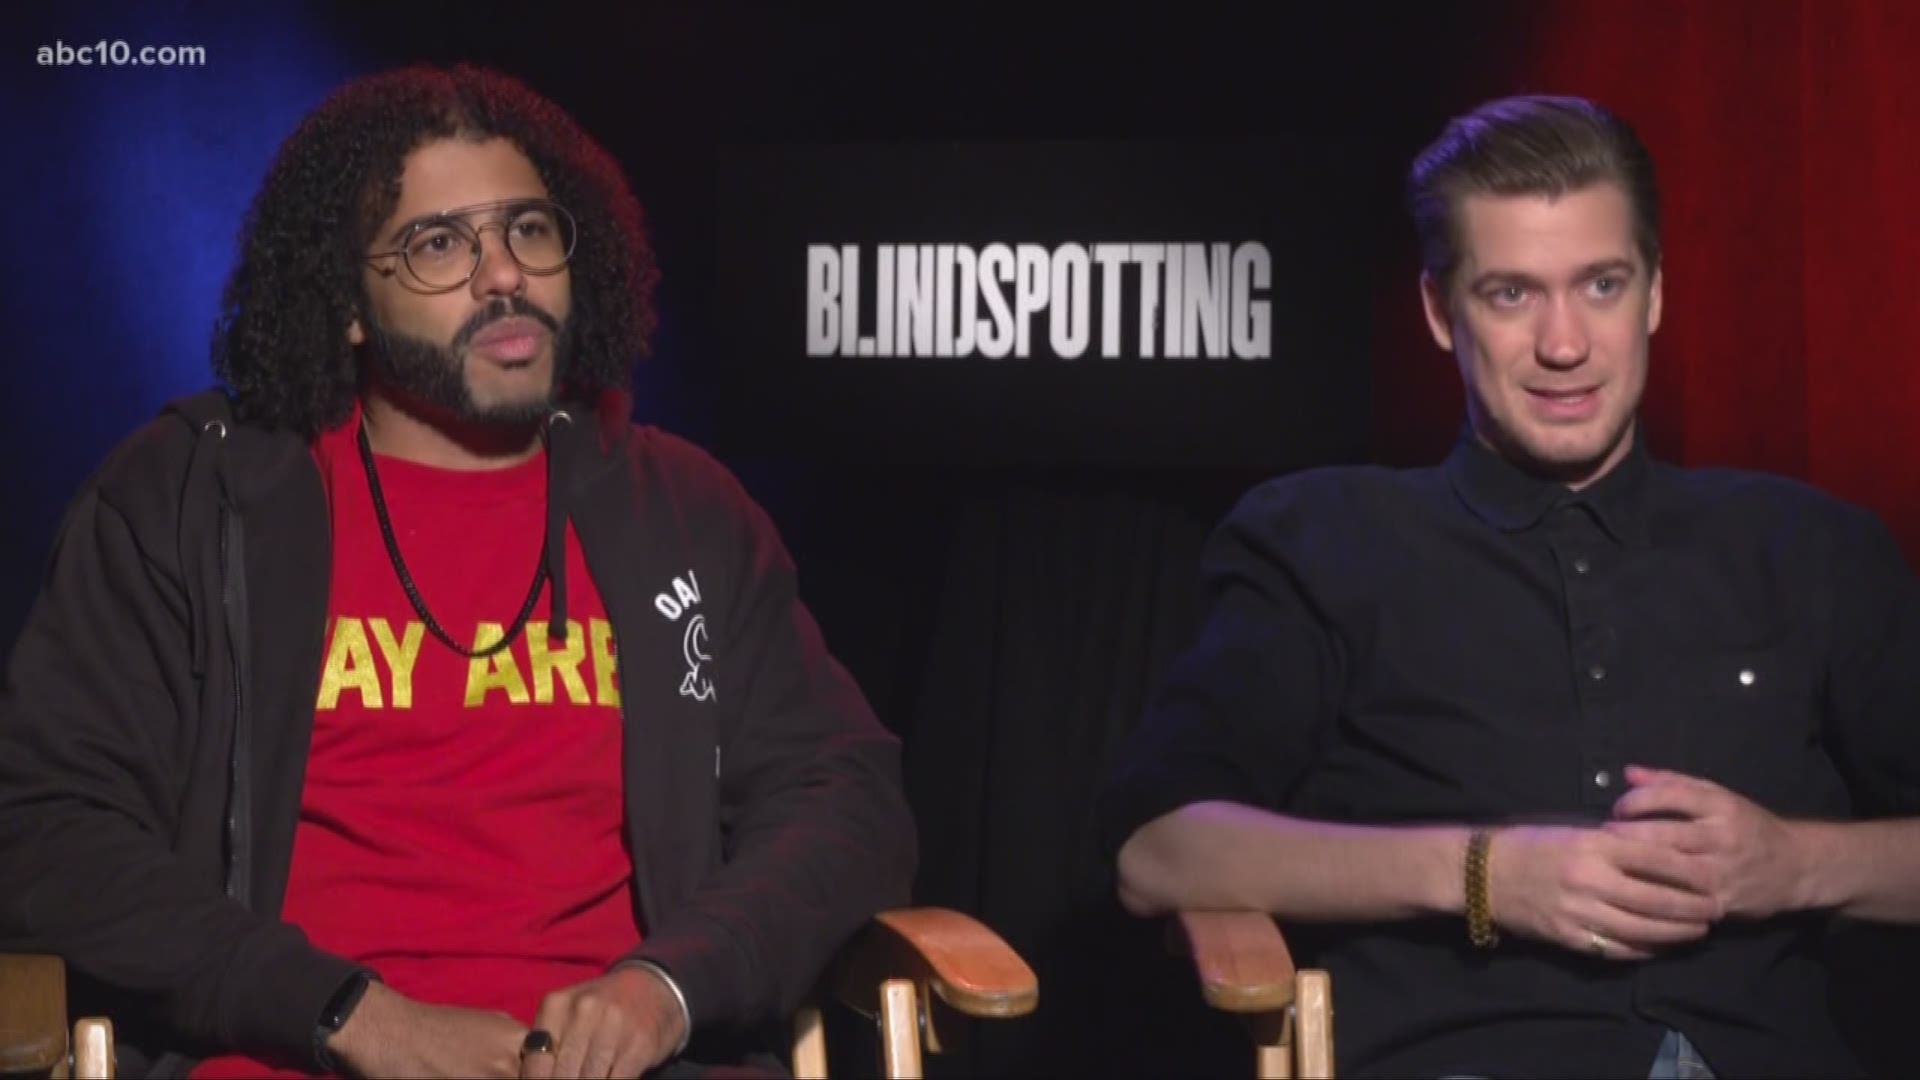 Mark S. Allen, as he always does for the biggest movies and TV shows, spoke with the stars of one of most anticipated movies of the year - "Blindspotting."